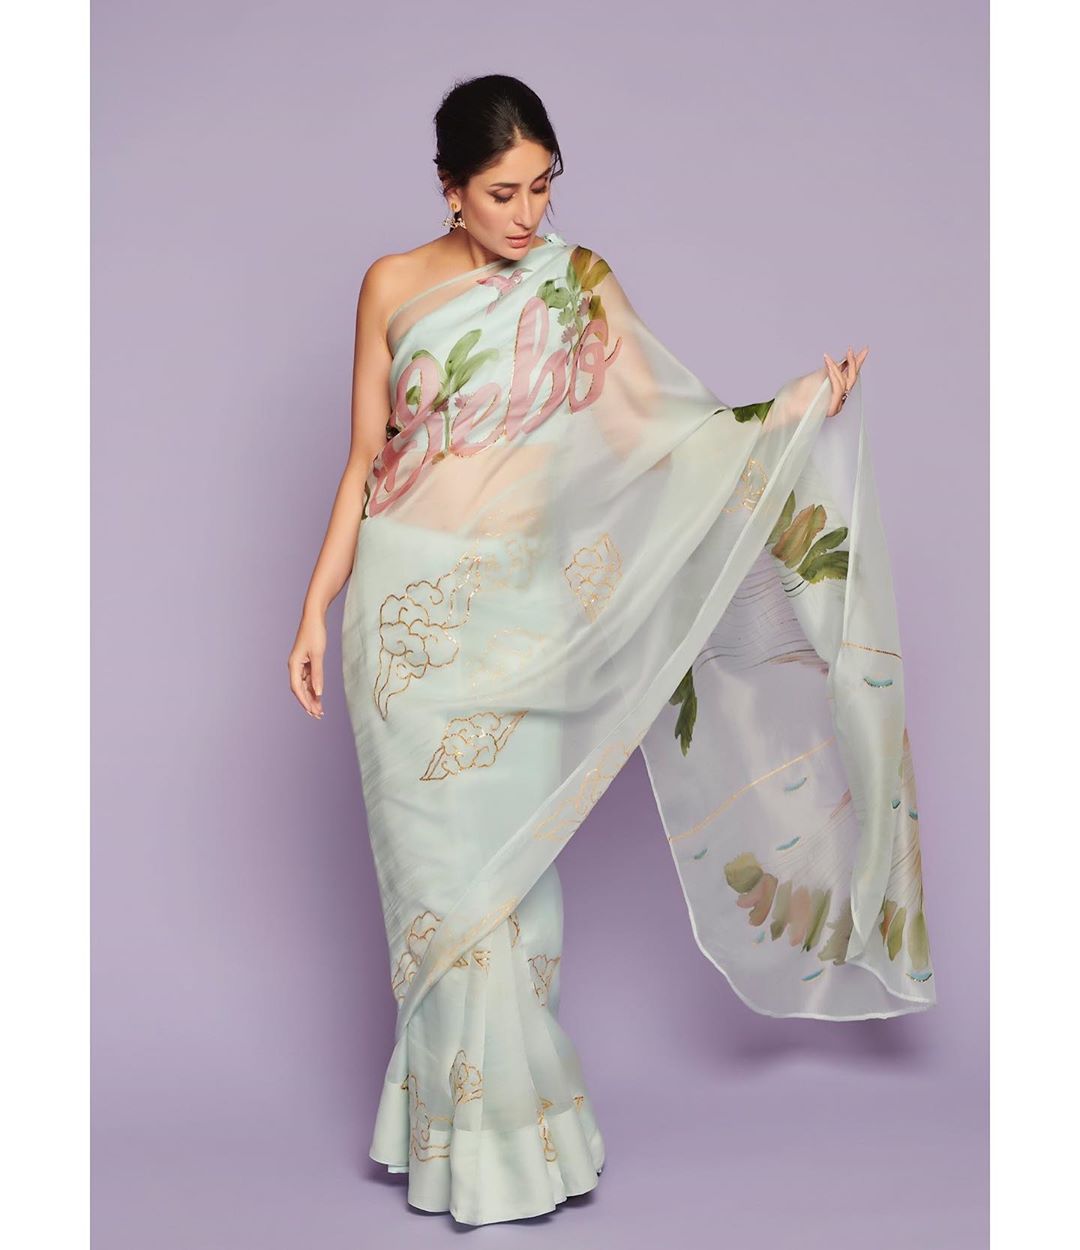 Three Organza Saris We Fell In Love With In 2019 - Masala